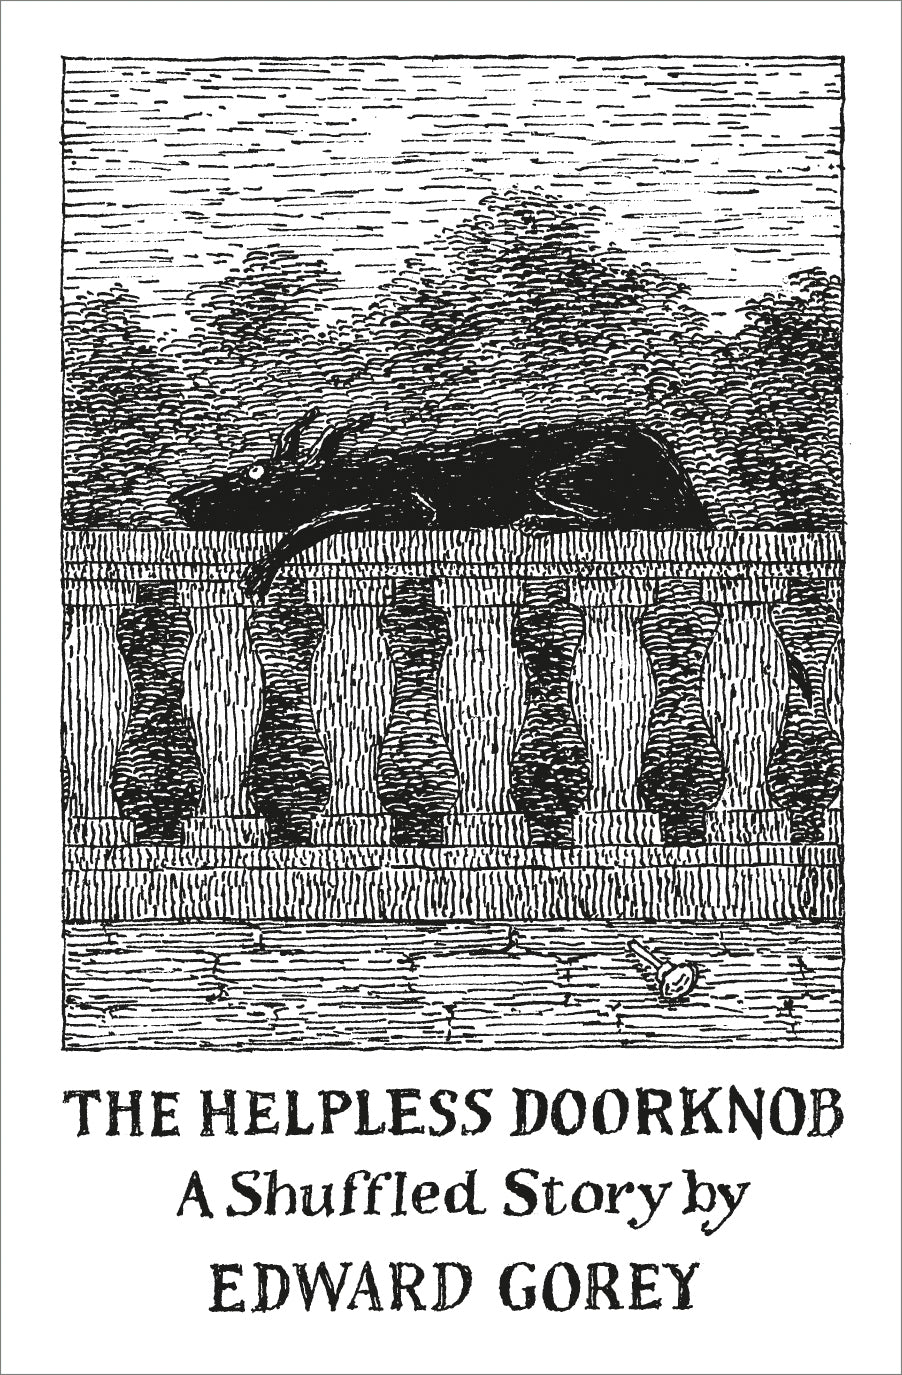 The Helpless Doorknob: A Shuffled Story by Edward Gorey_Front_Flat